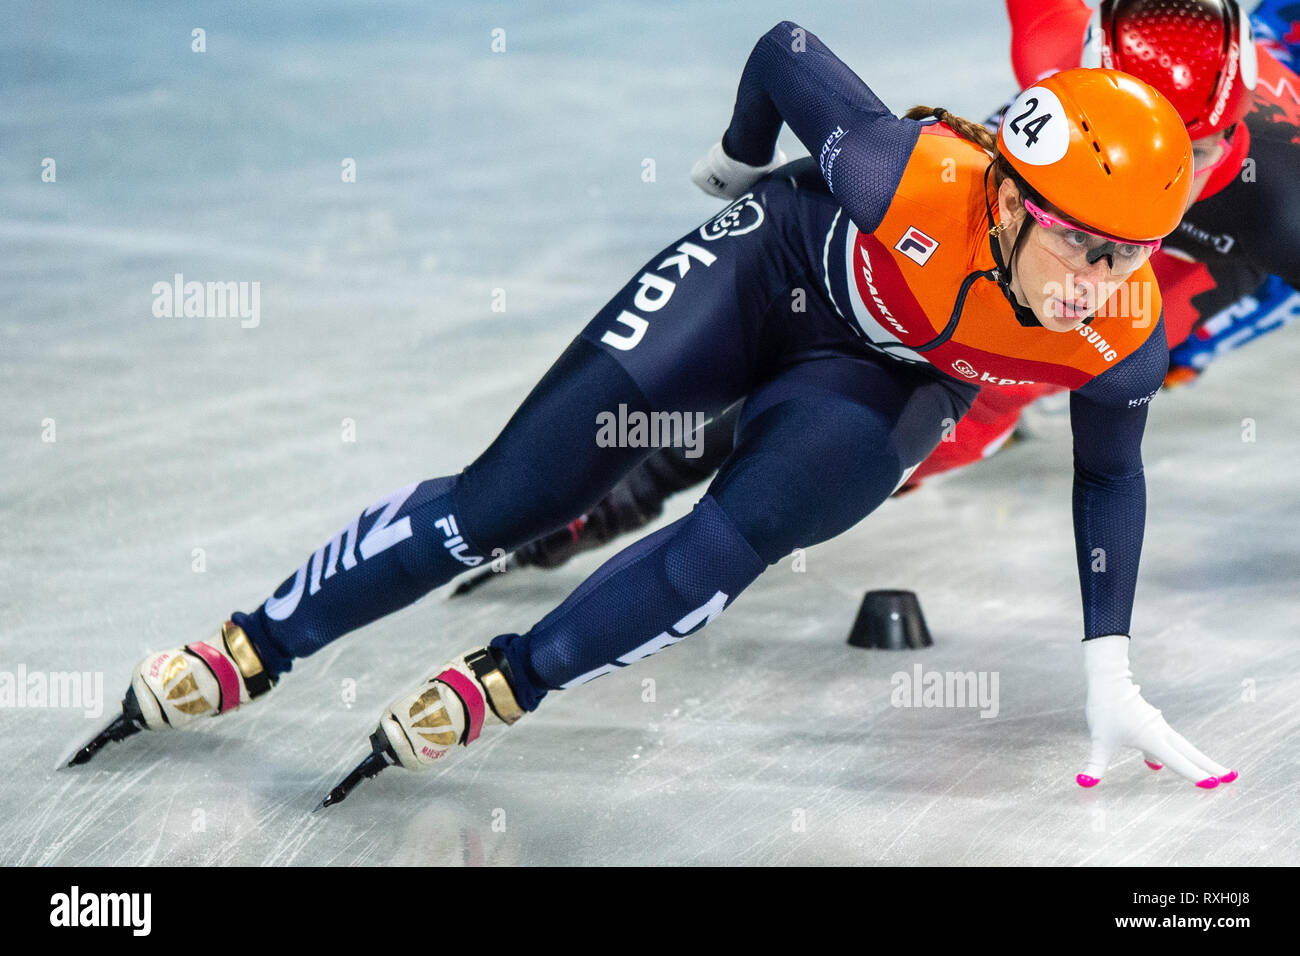 9th of march 2019 Sofia, Bulgaria ISU World Short Track Speed Skating Championships  Suzanne Schulting Credit: Orange Pictures vof/Alamy Live News Credit: Orange Pictures vof/Alamy Live News Stock Photo